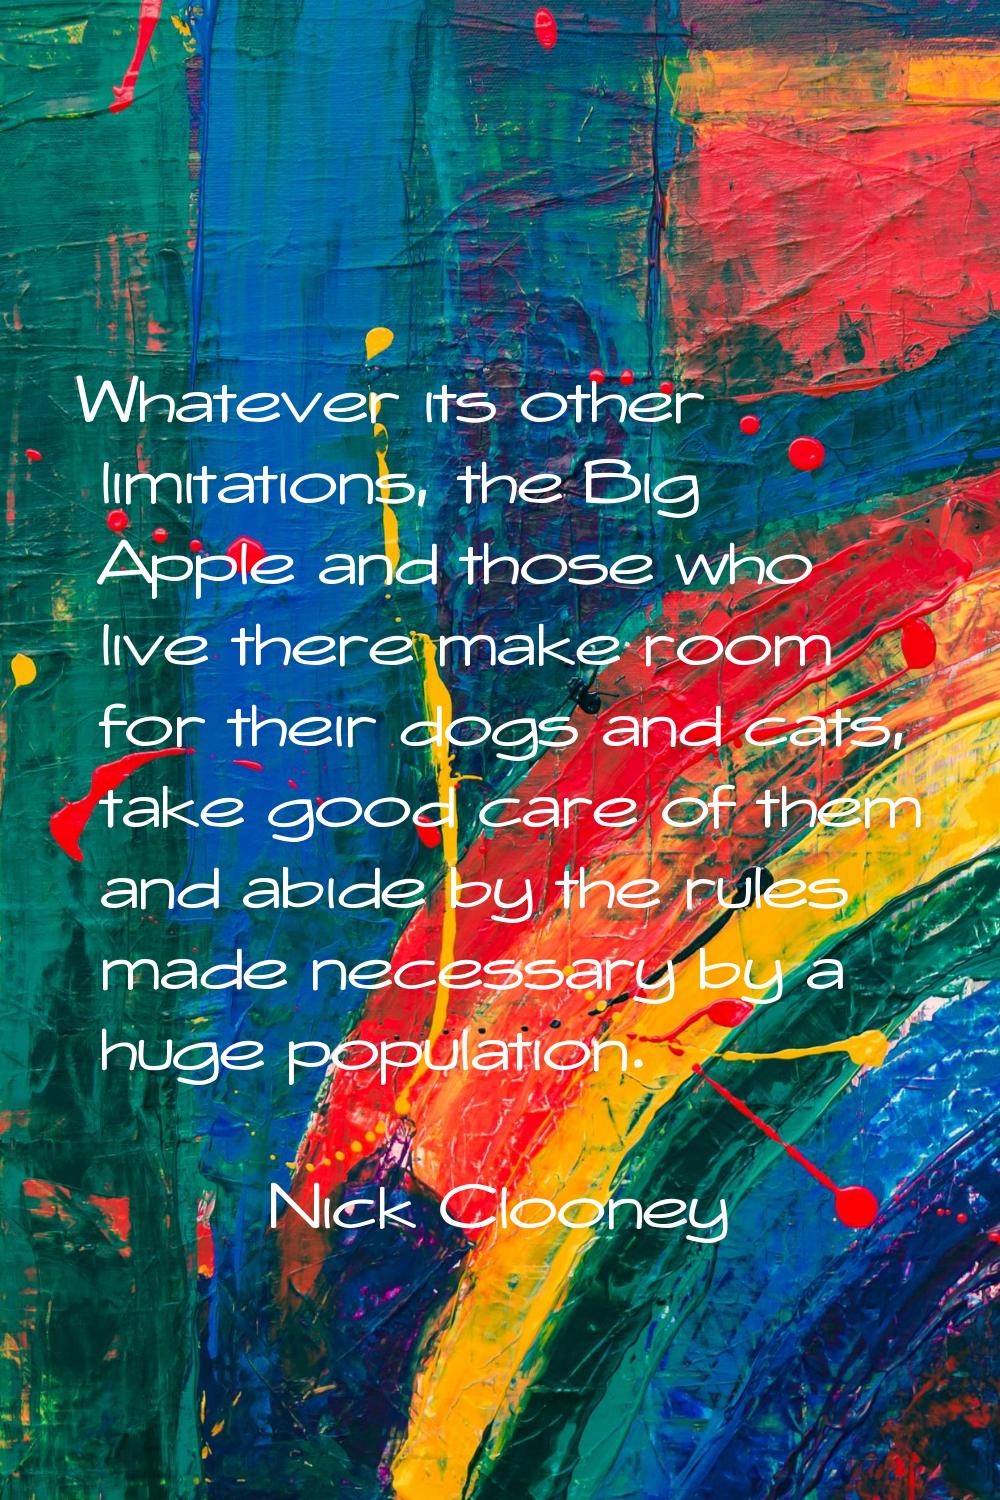 Whatever its other limitations, the Big Apple and those who live there make room for their dogs and